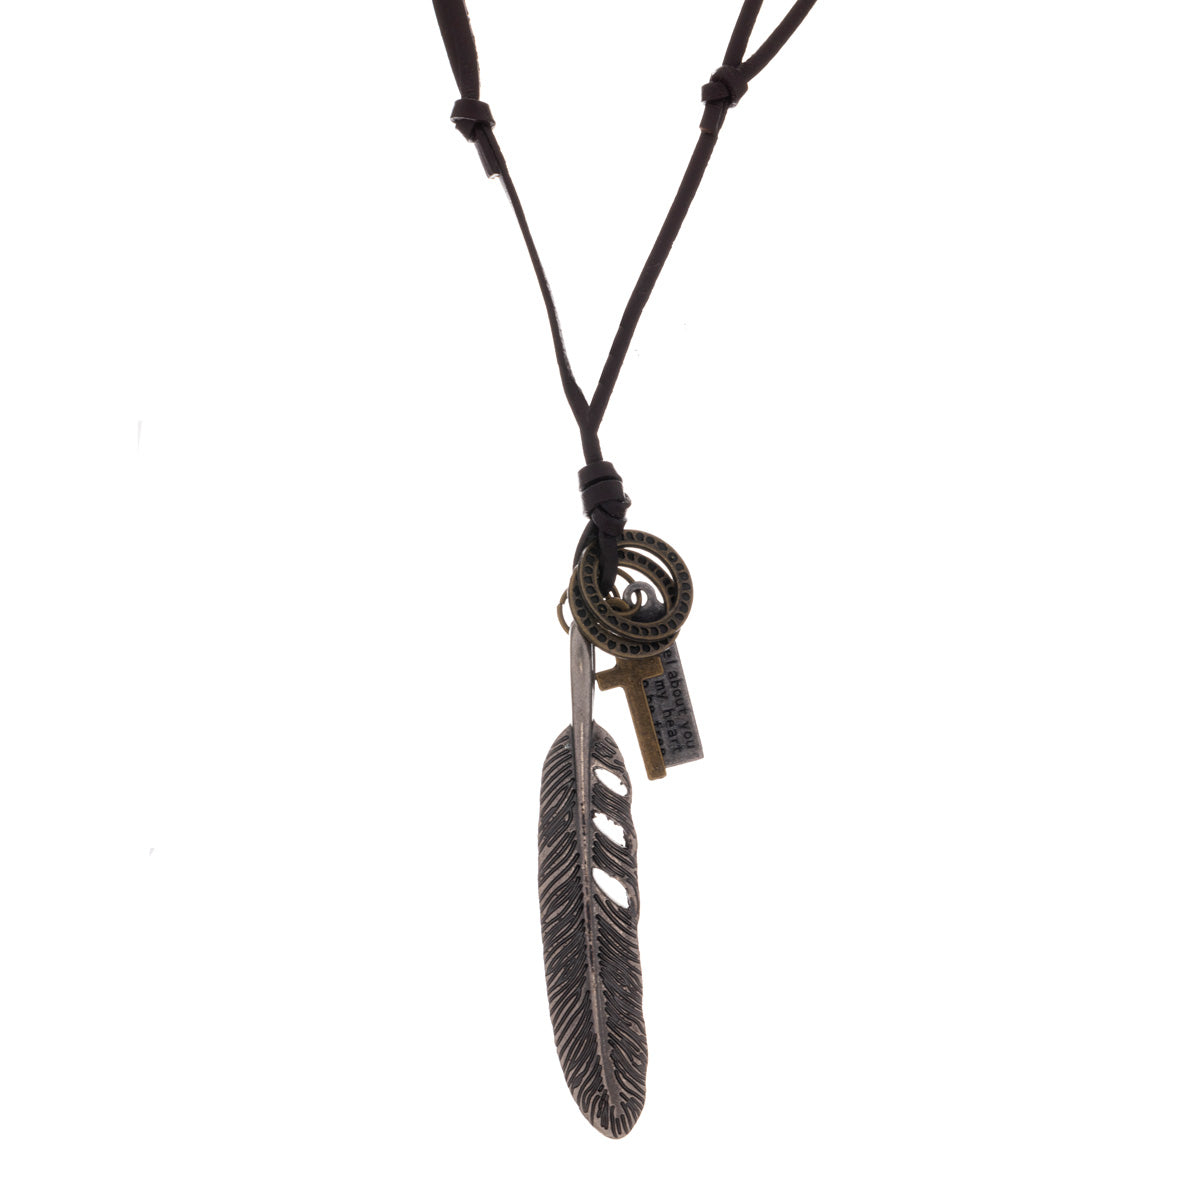 Feather pendant necklace in a leather ribbon